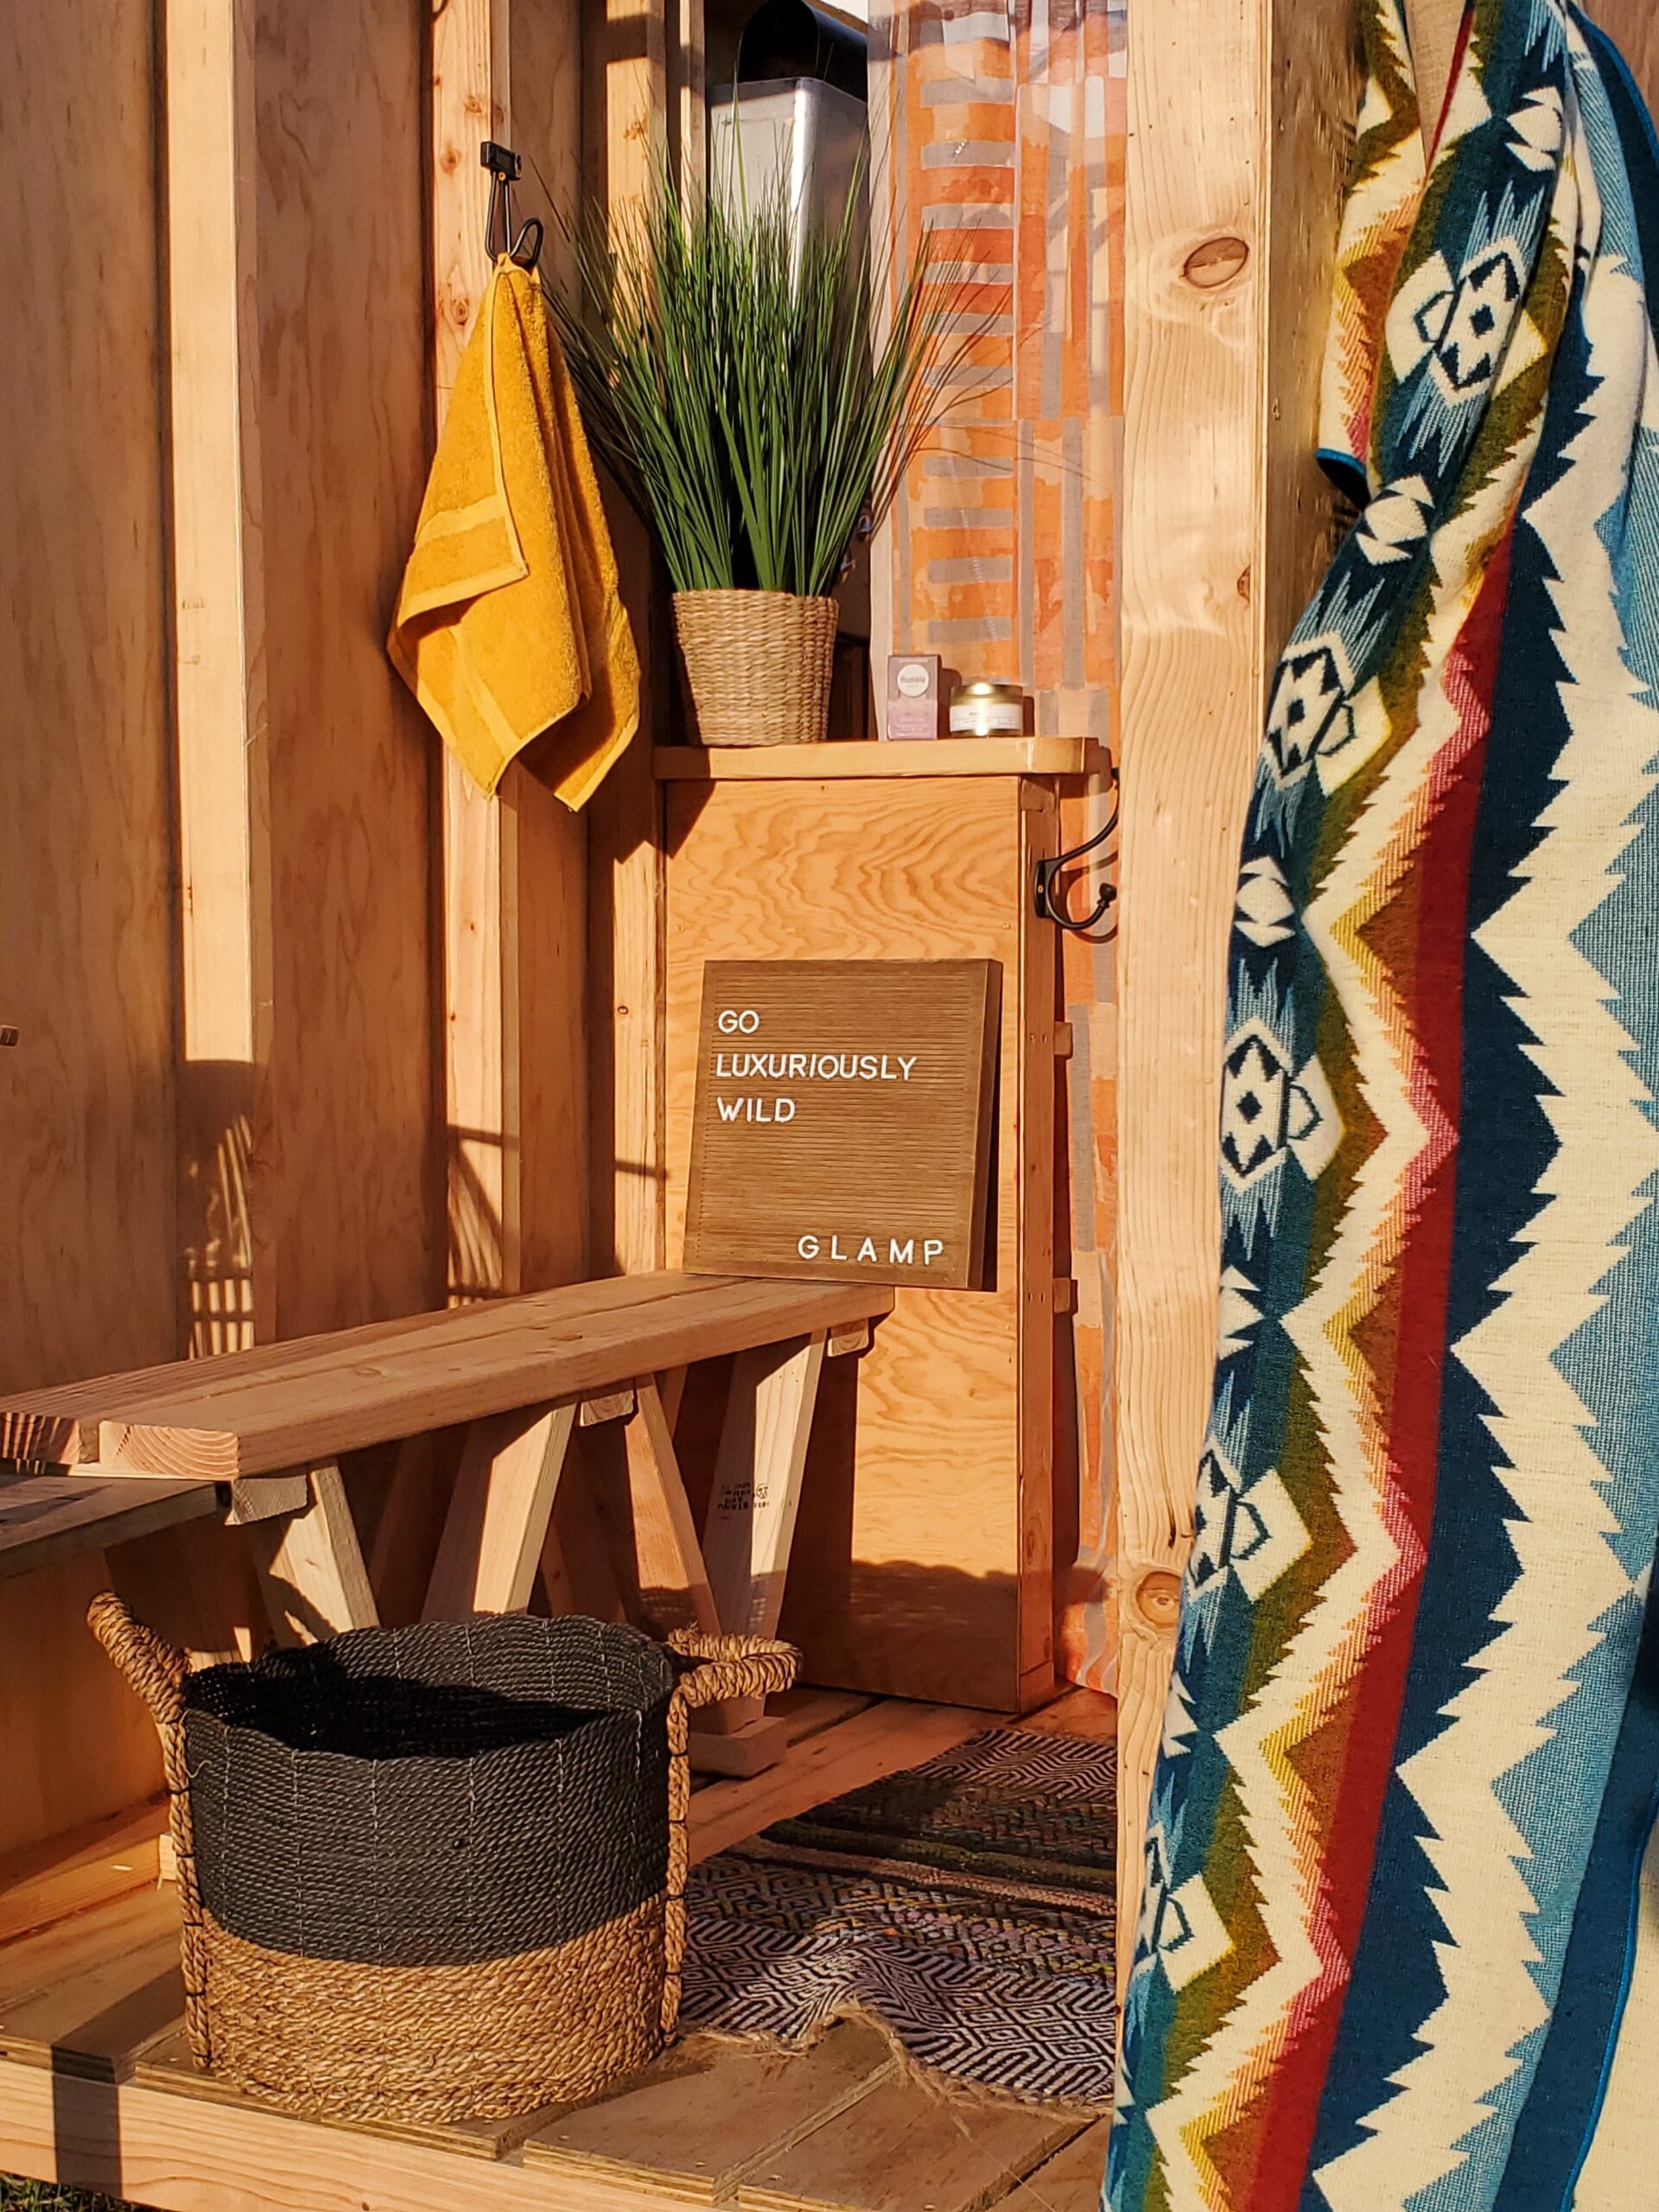 Wooden shower area, with a wooden bench and a multicolored towel hanging from a hook